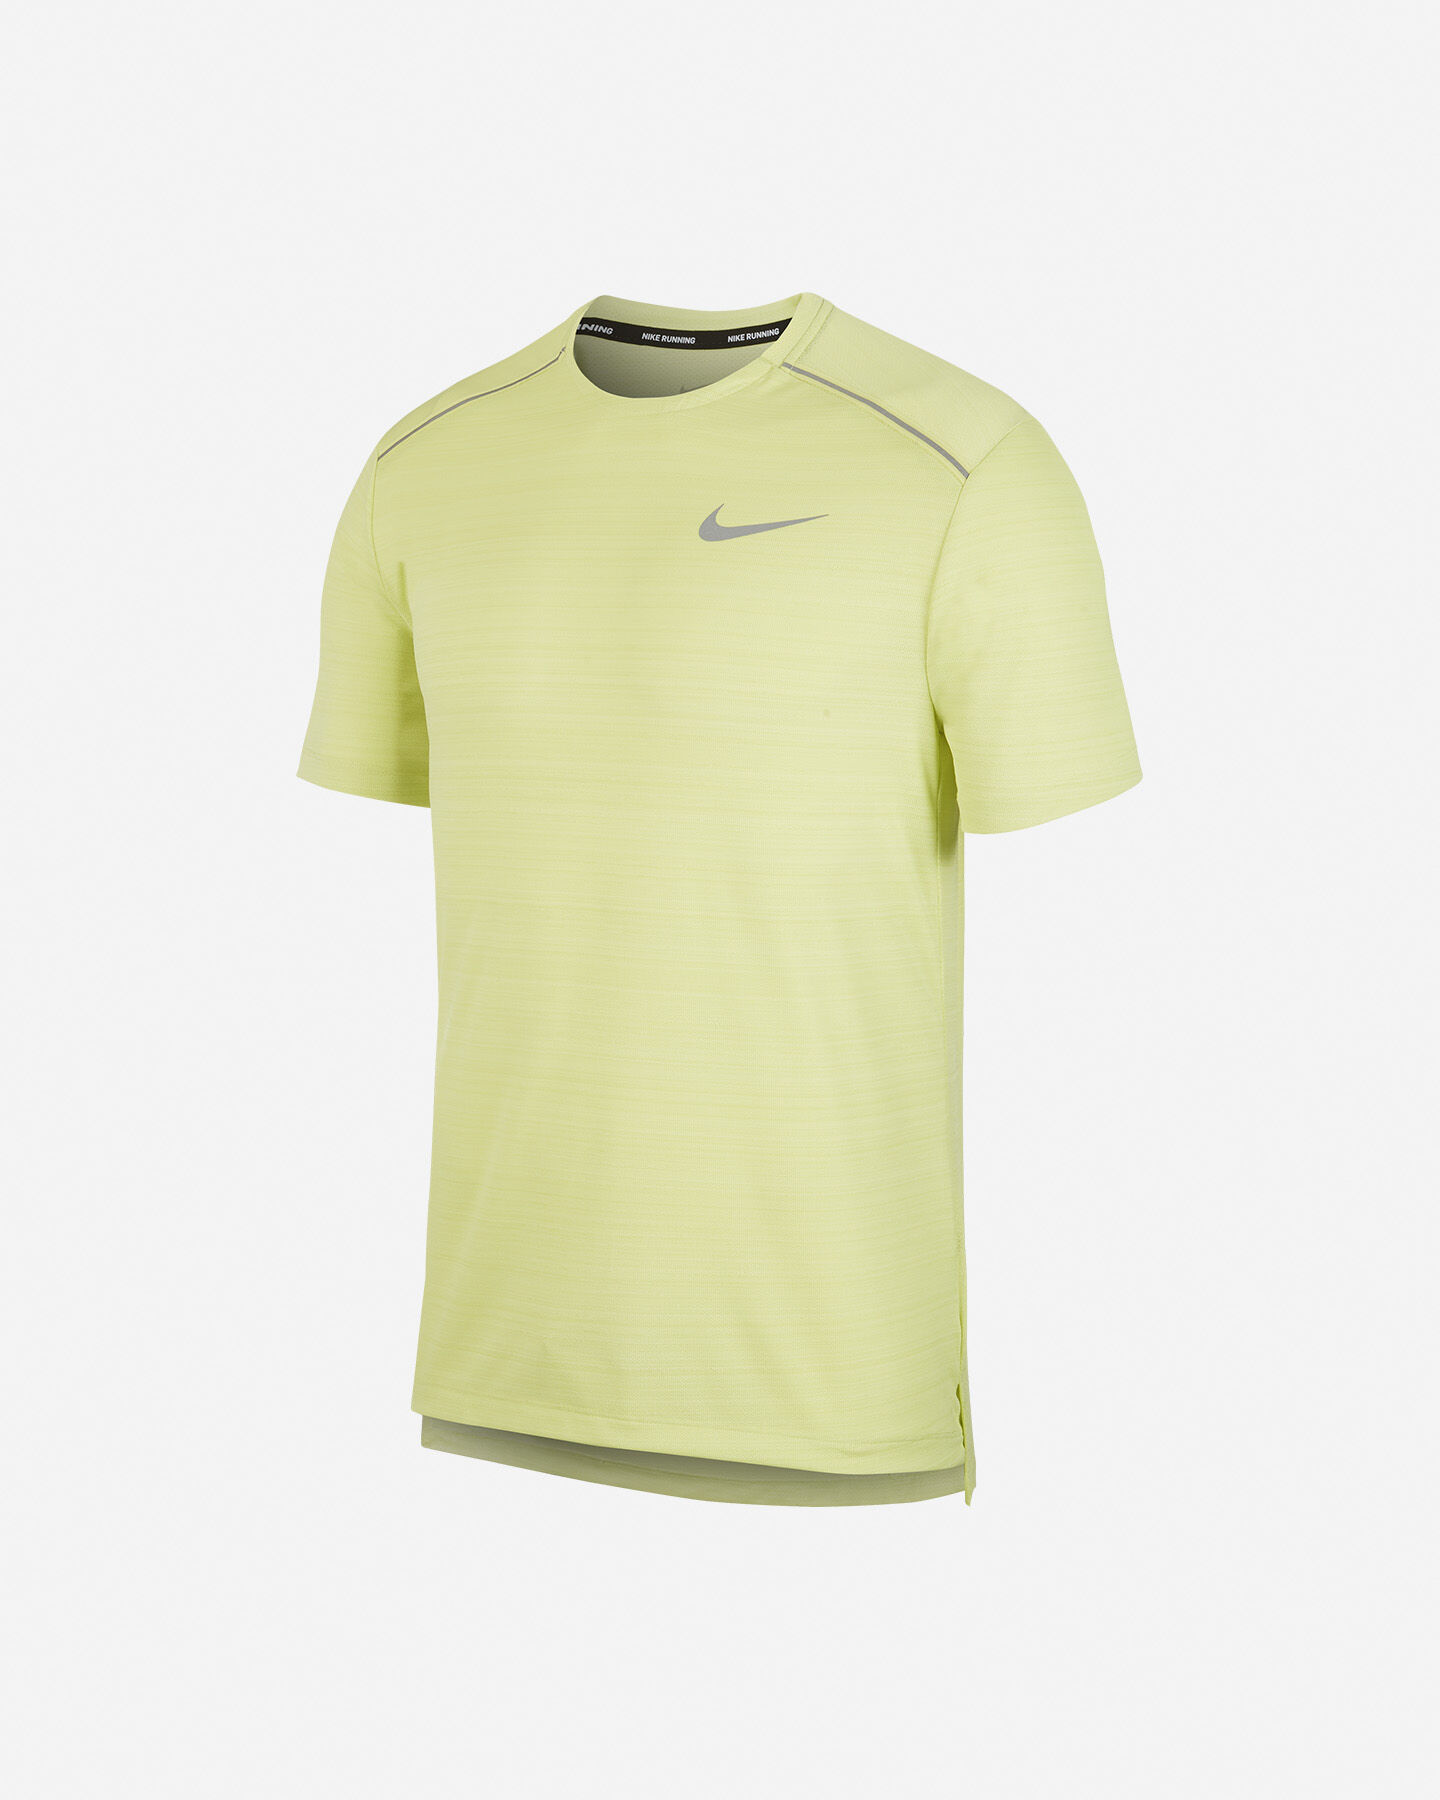  T-Shirt running NIKE DRI-FIT MILER M S5194863|367|S scatto 0